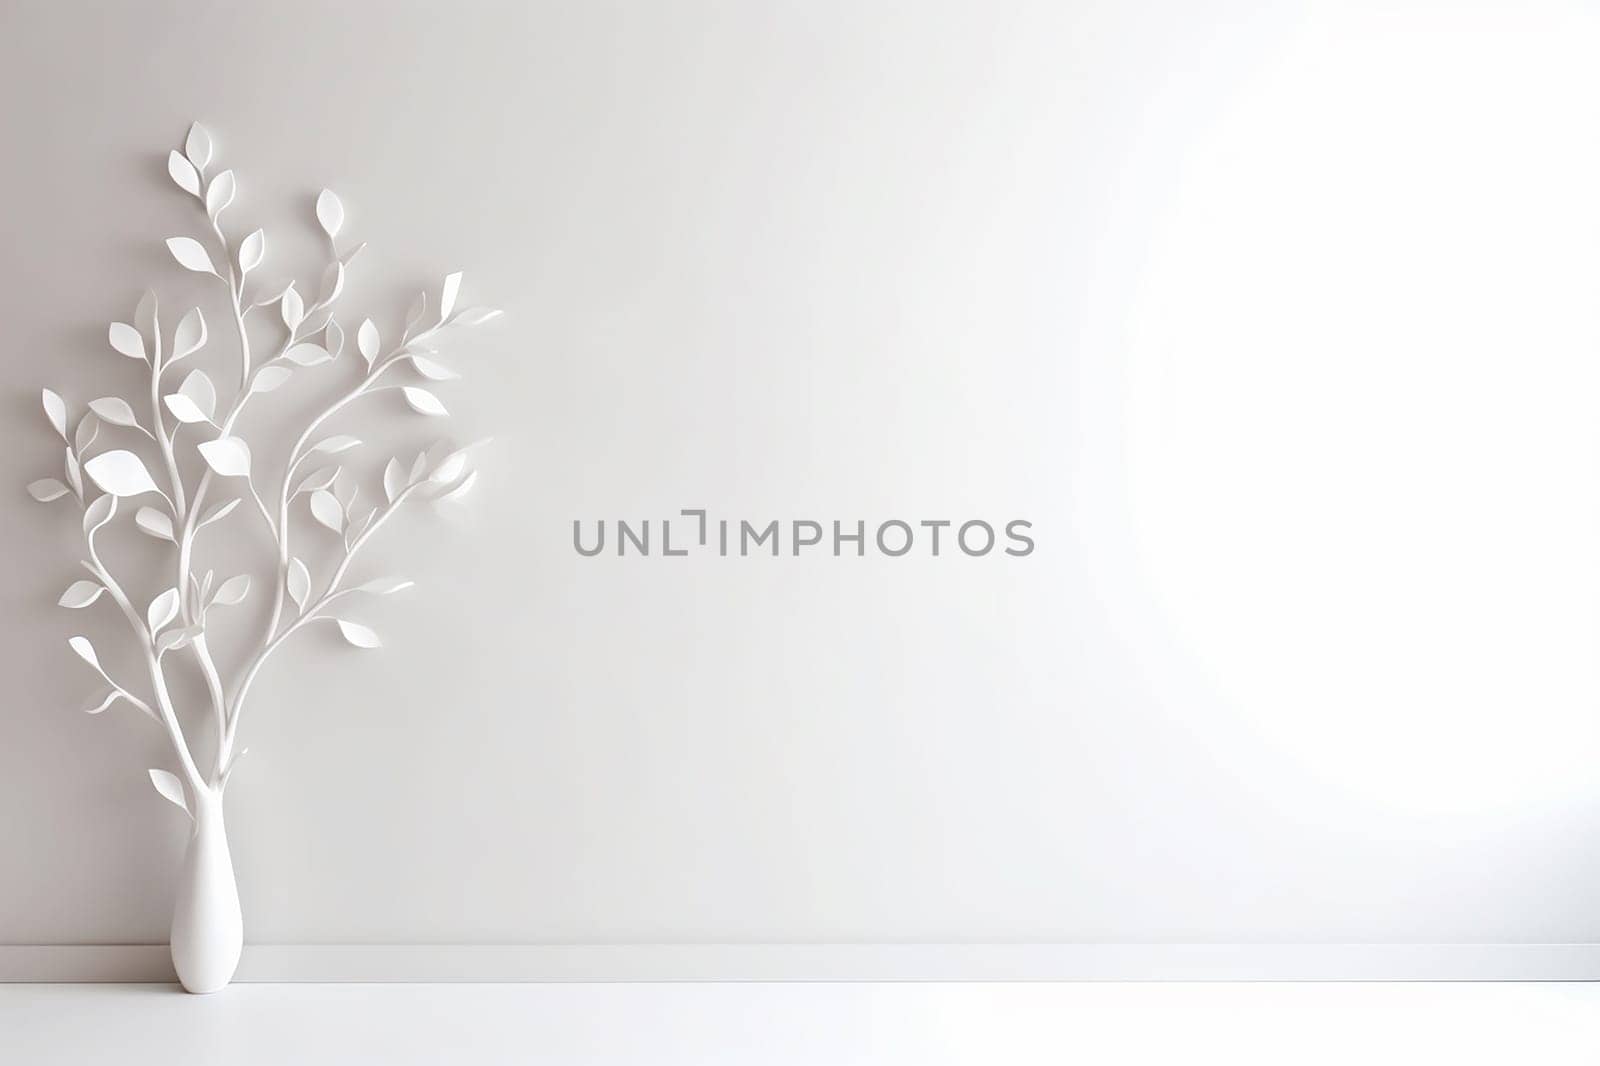 Minimalist white space with a vase and decorative leaves.